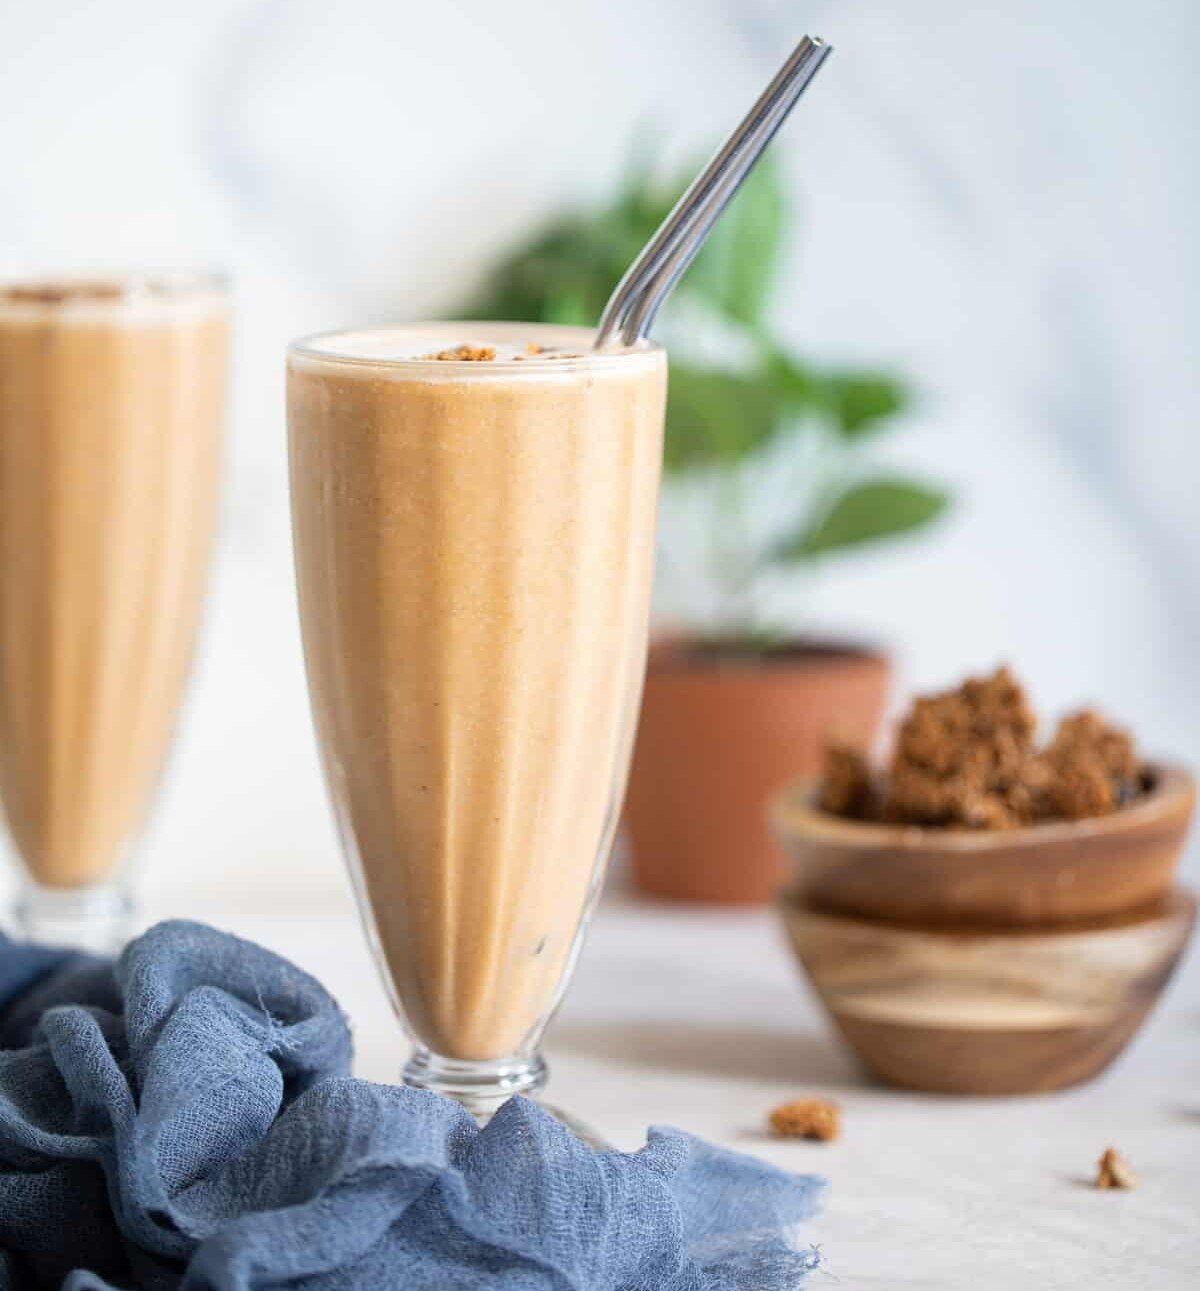 Sweet Potato Breakfast Smoothie in a tall glass with metal straw.